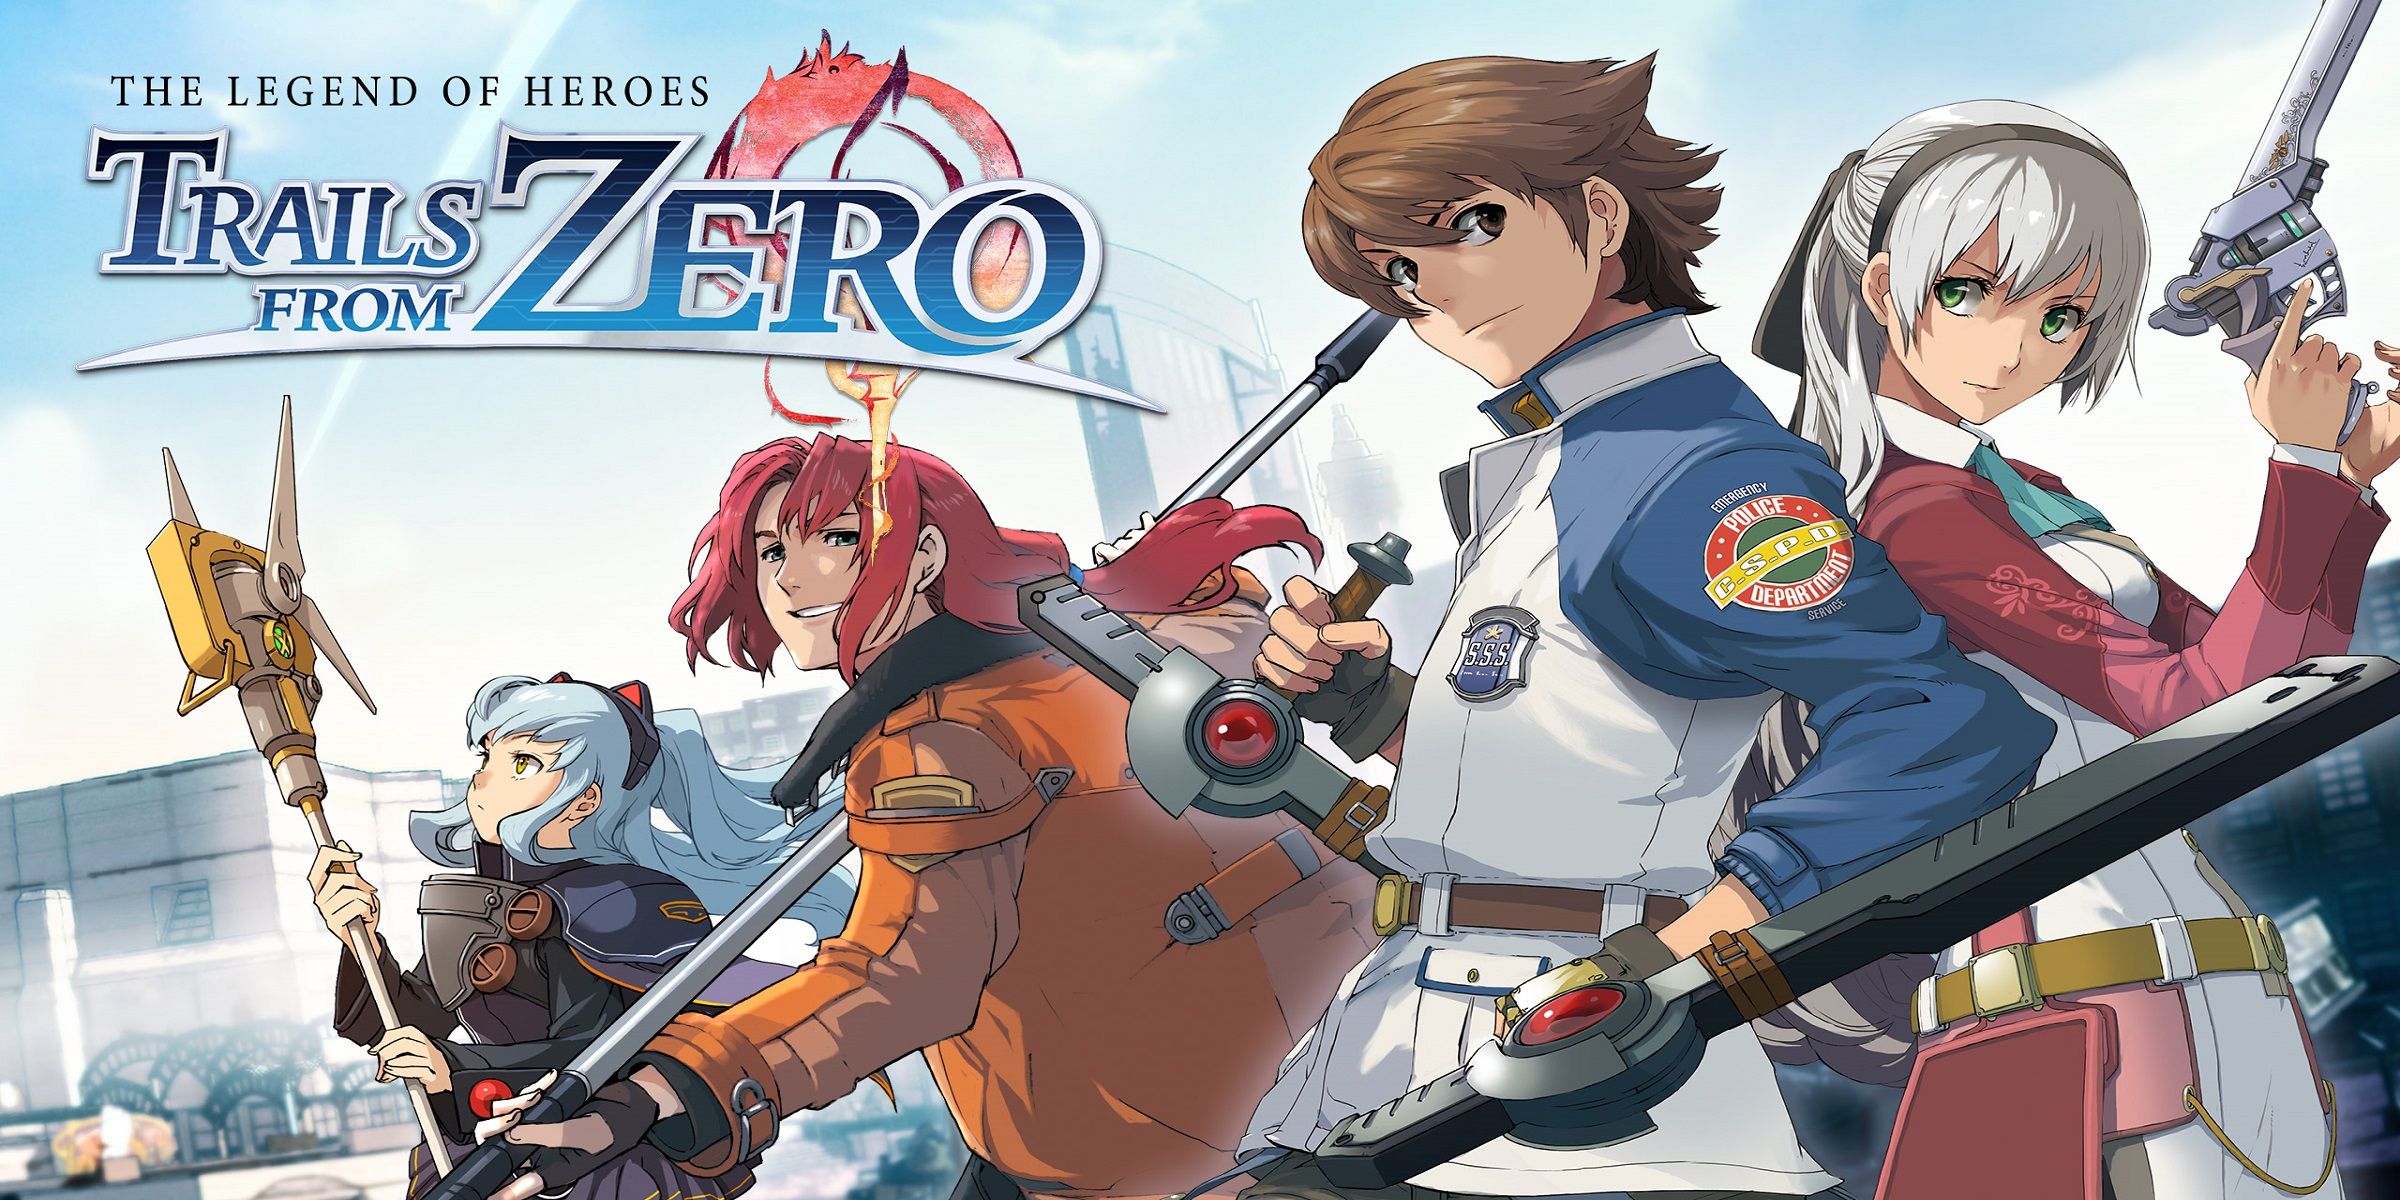 Legend of Heroes - Trails from Zero image.